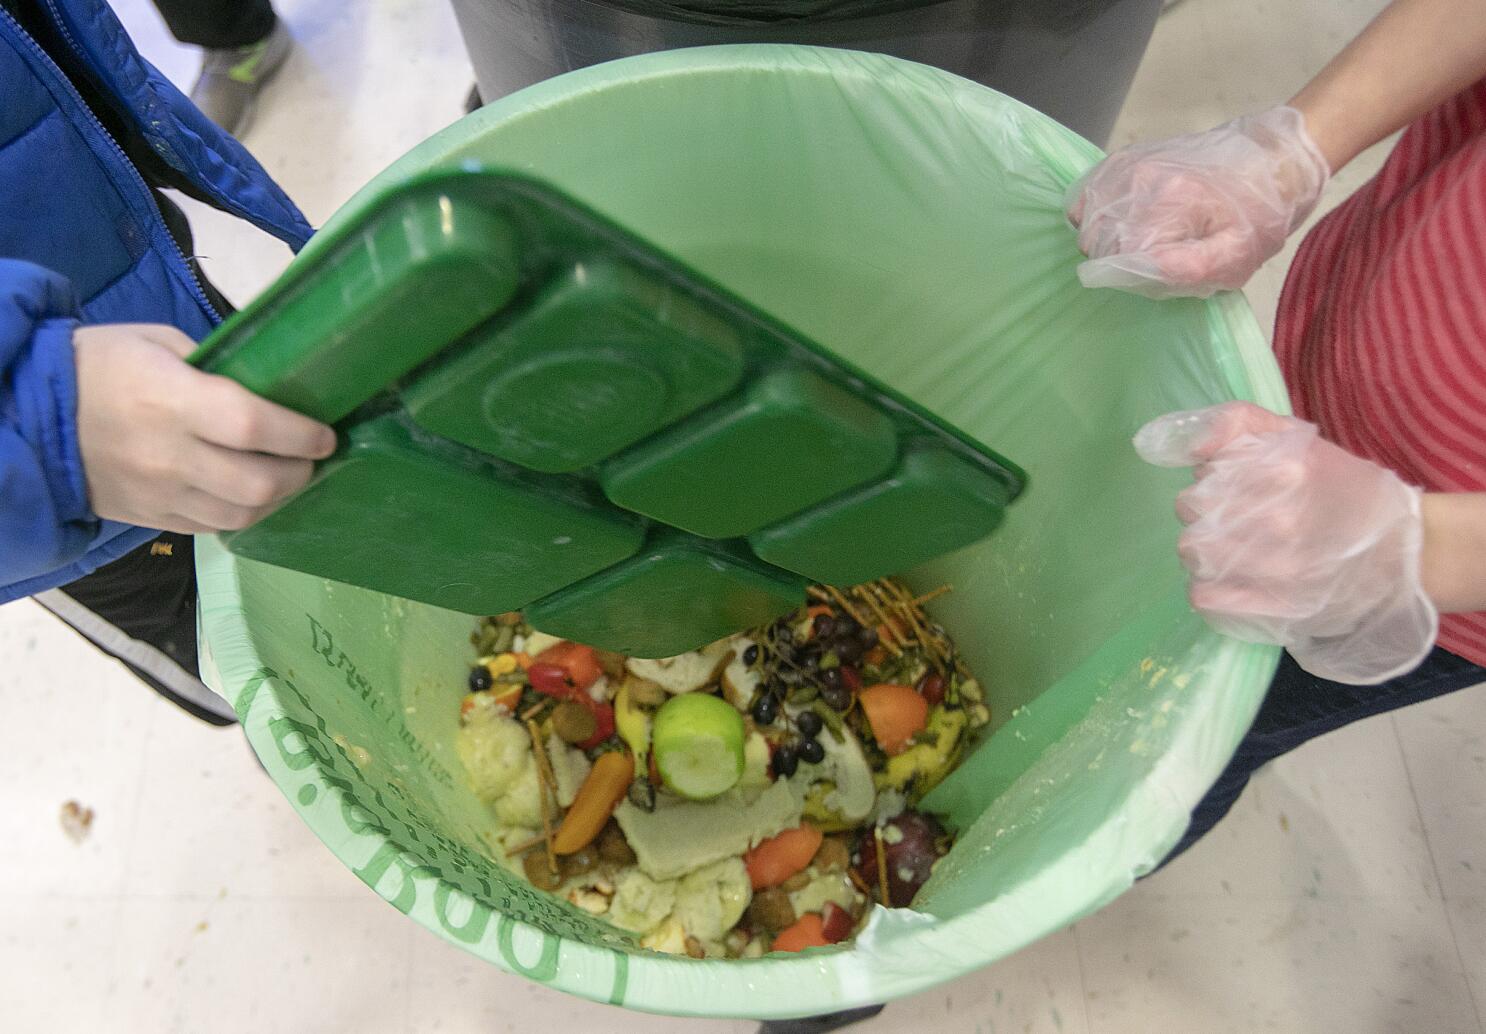 Rolling Out Residential Food Waste Collection In Connecticut